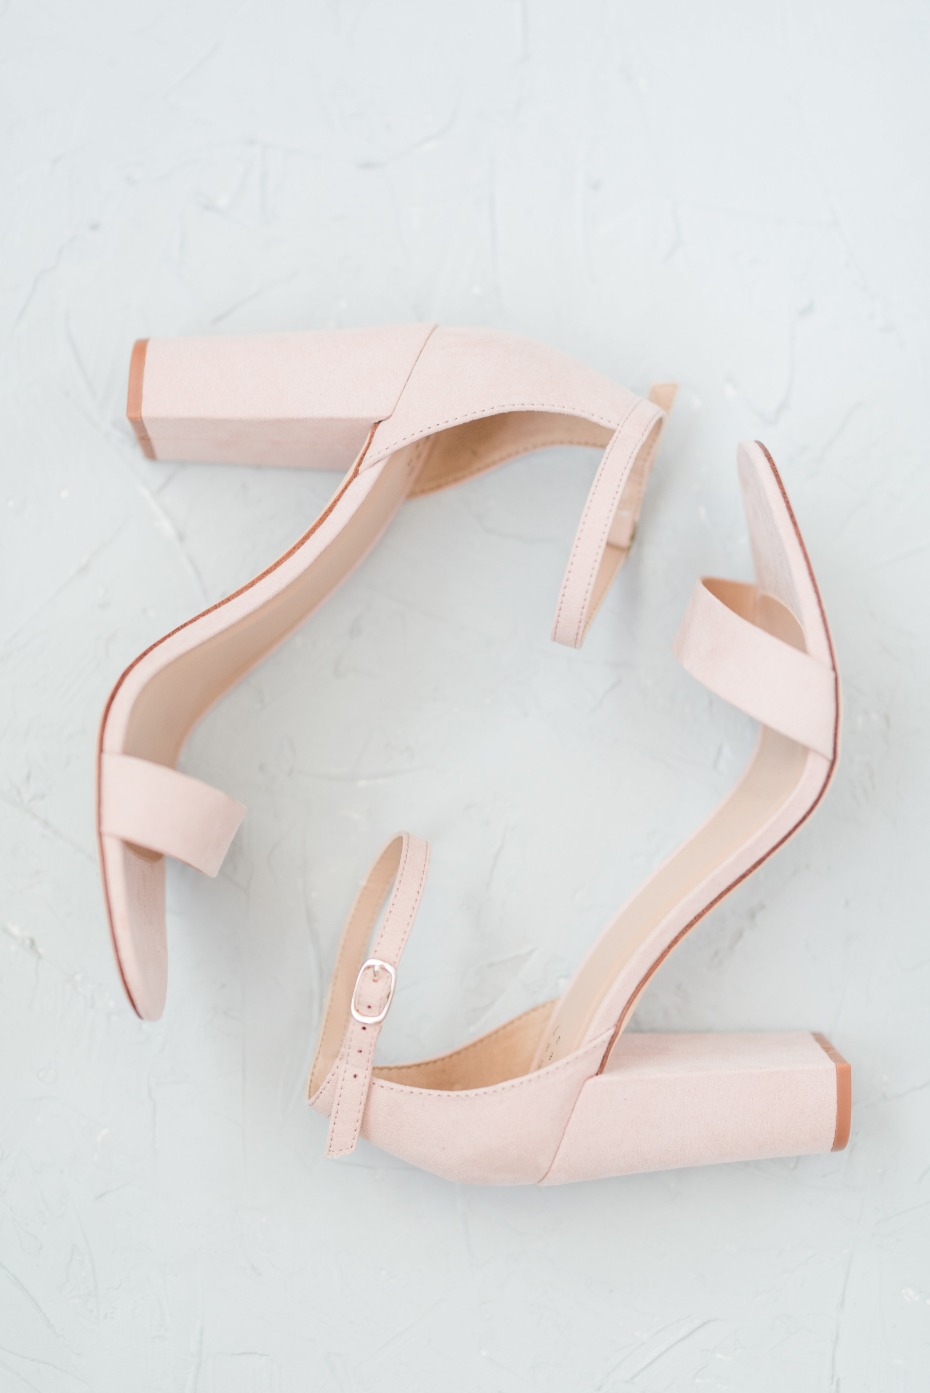 Blush heels for the bride